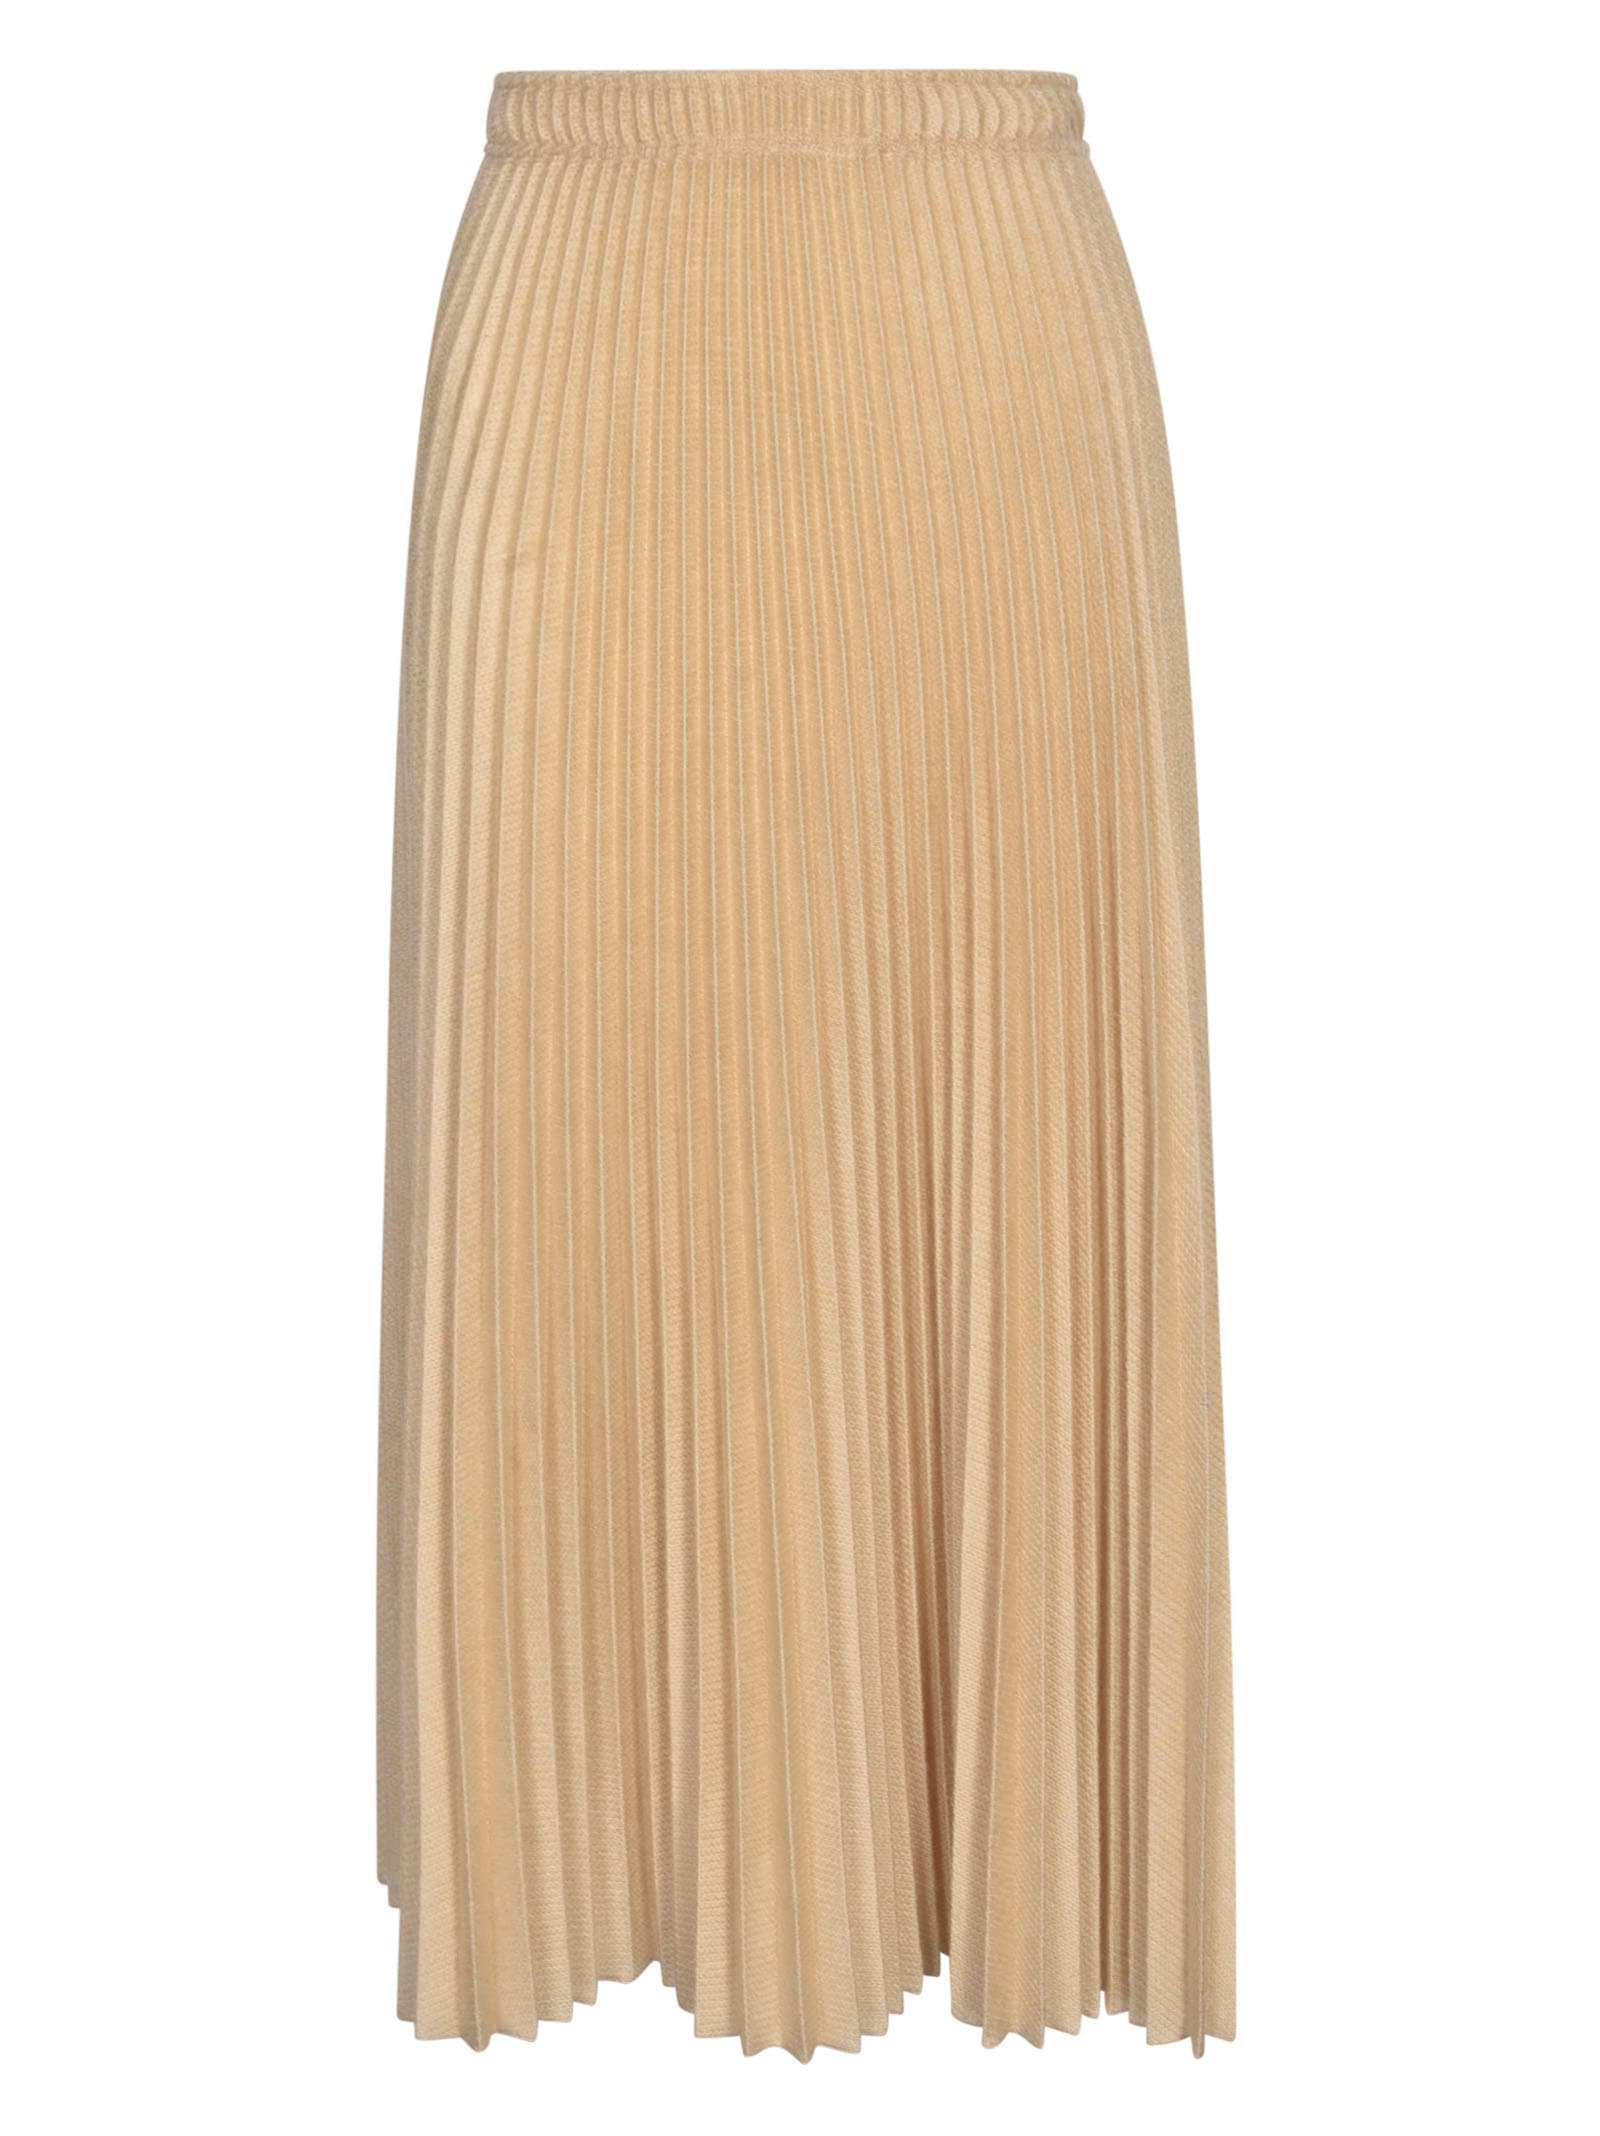 Ermanno Scervino Pleat Effect Knit Skirt In Panna